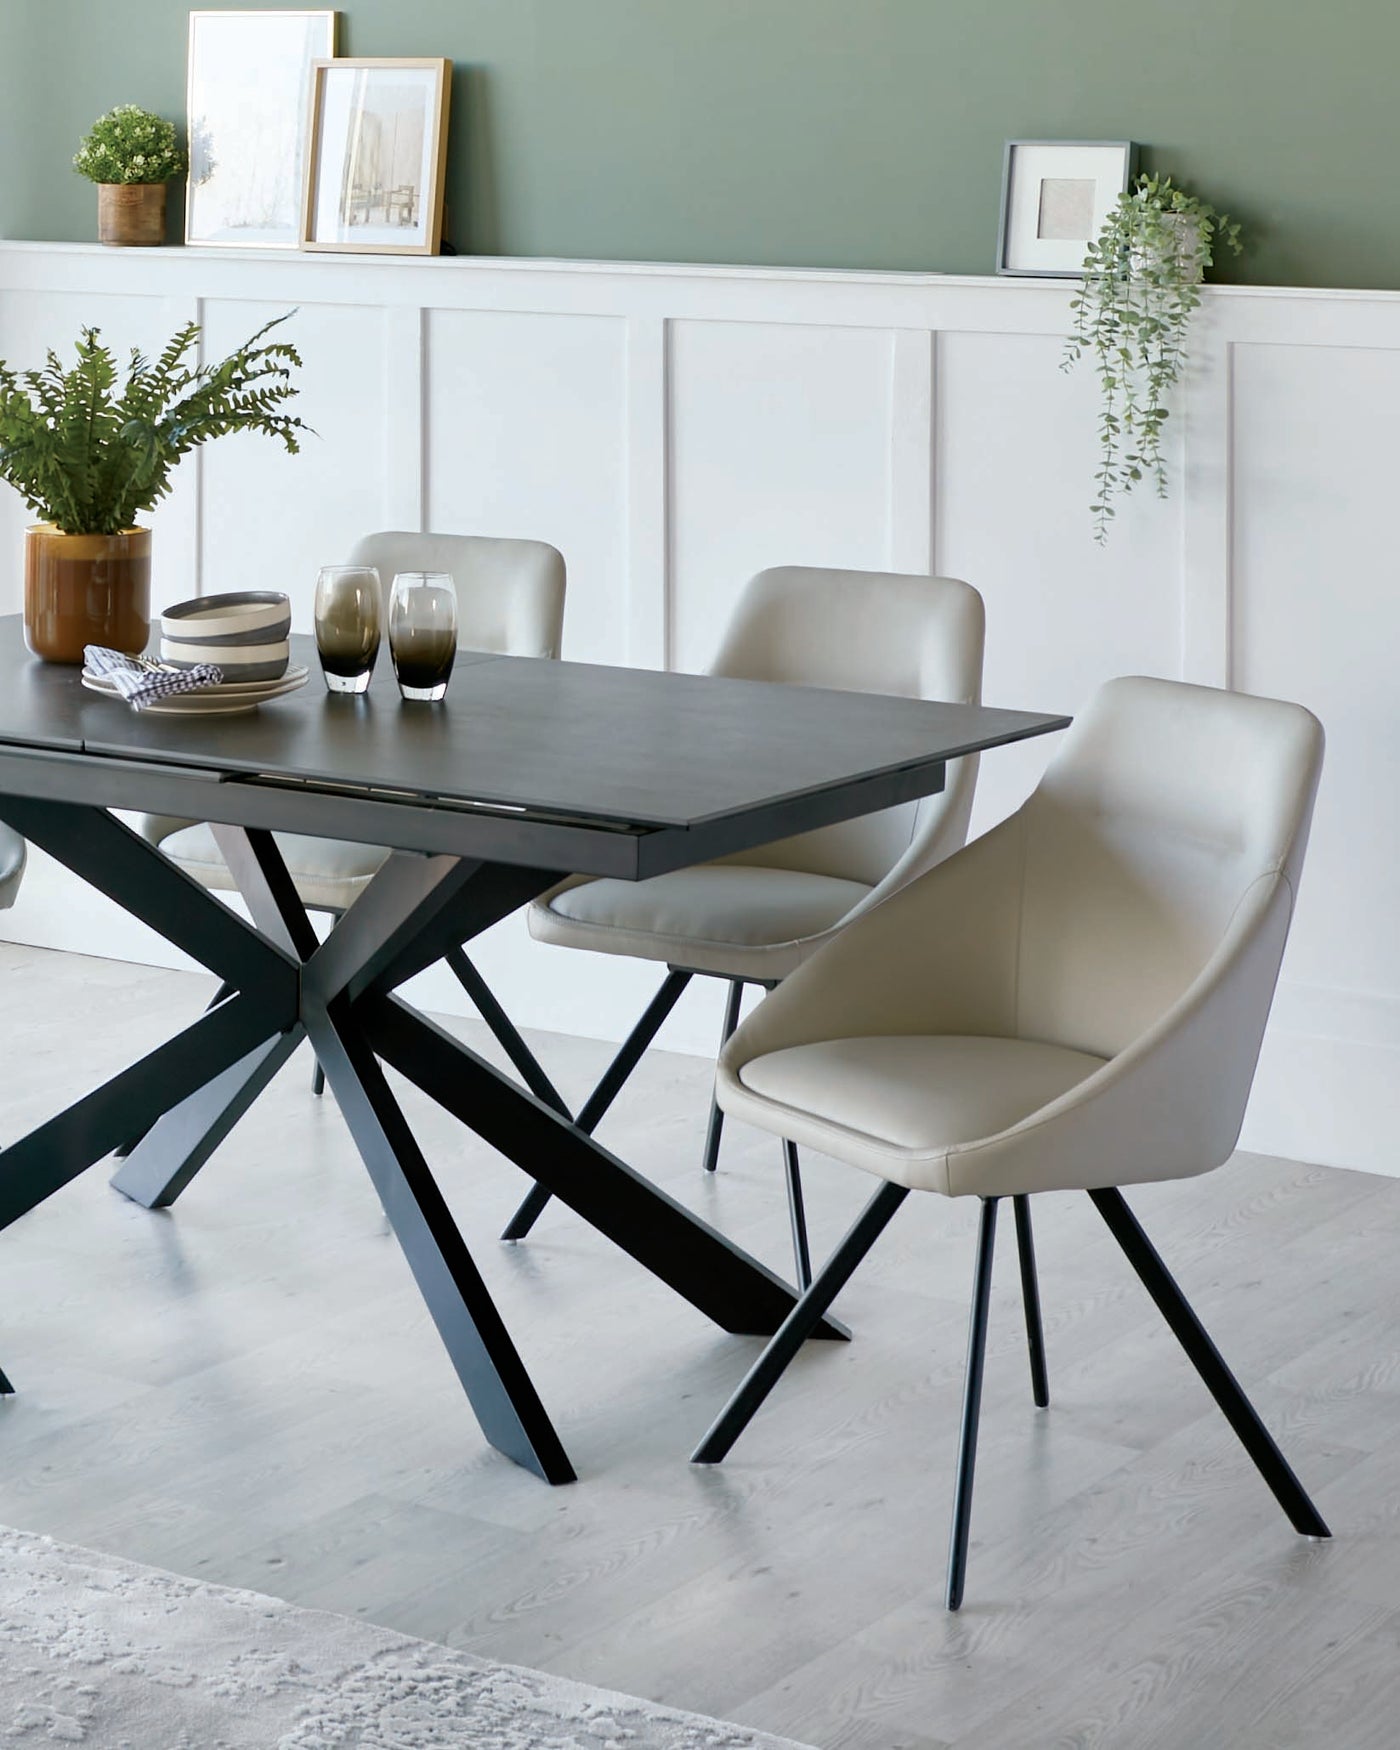 A modern dining set featuring a rectangular table with a dark wood finish and an angular black metal base, paired with three sleek, light grey upholstered chairs with black metal legs. The table is accessorized with a small pot plant, striped bowls, and two dark glasses.